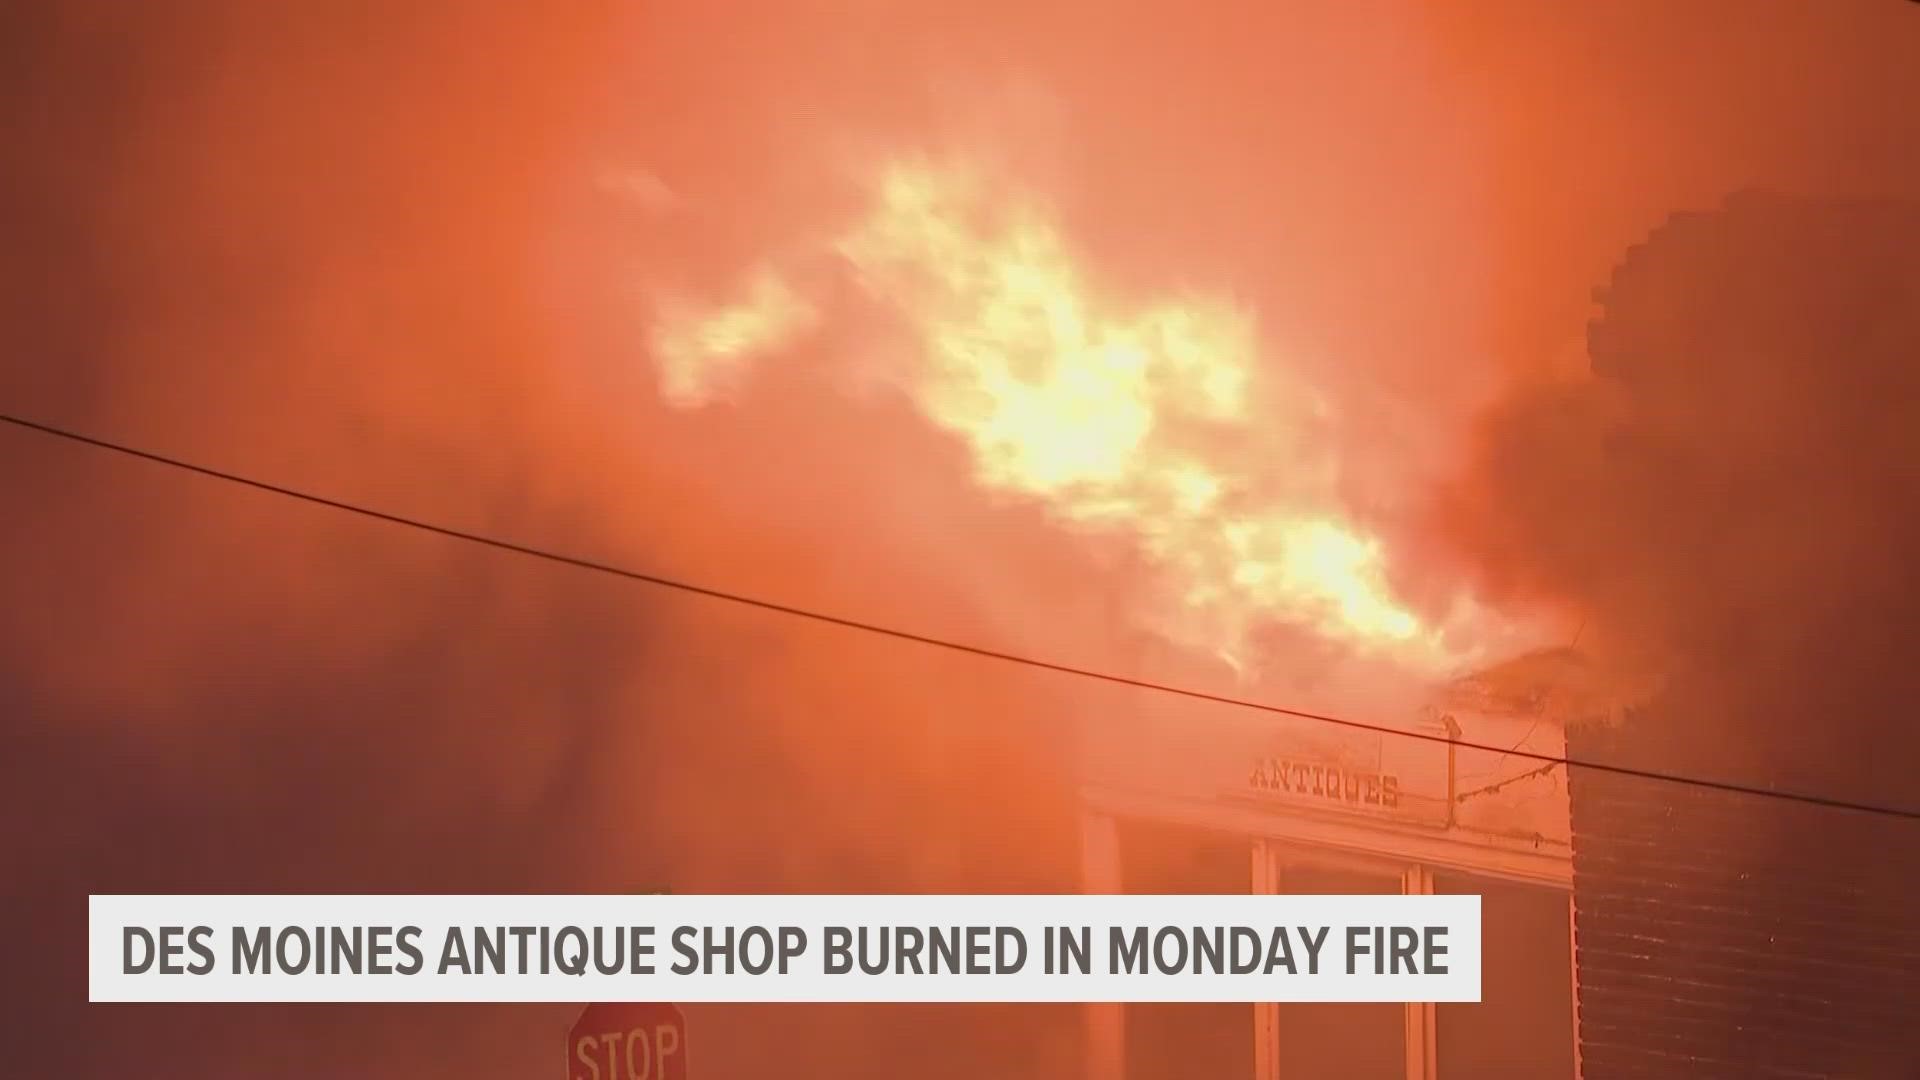 35th Street Antiques had been open for about three years before the fire.